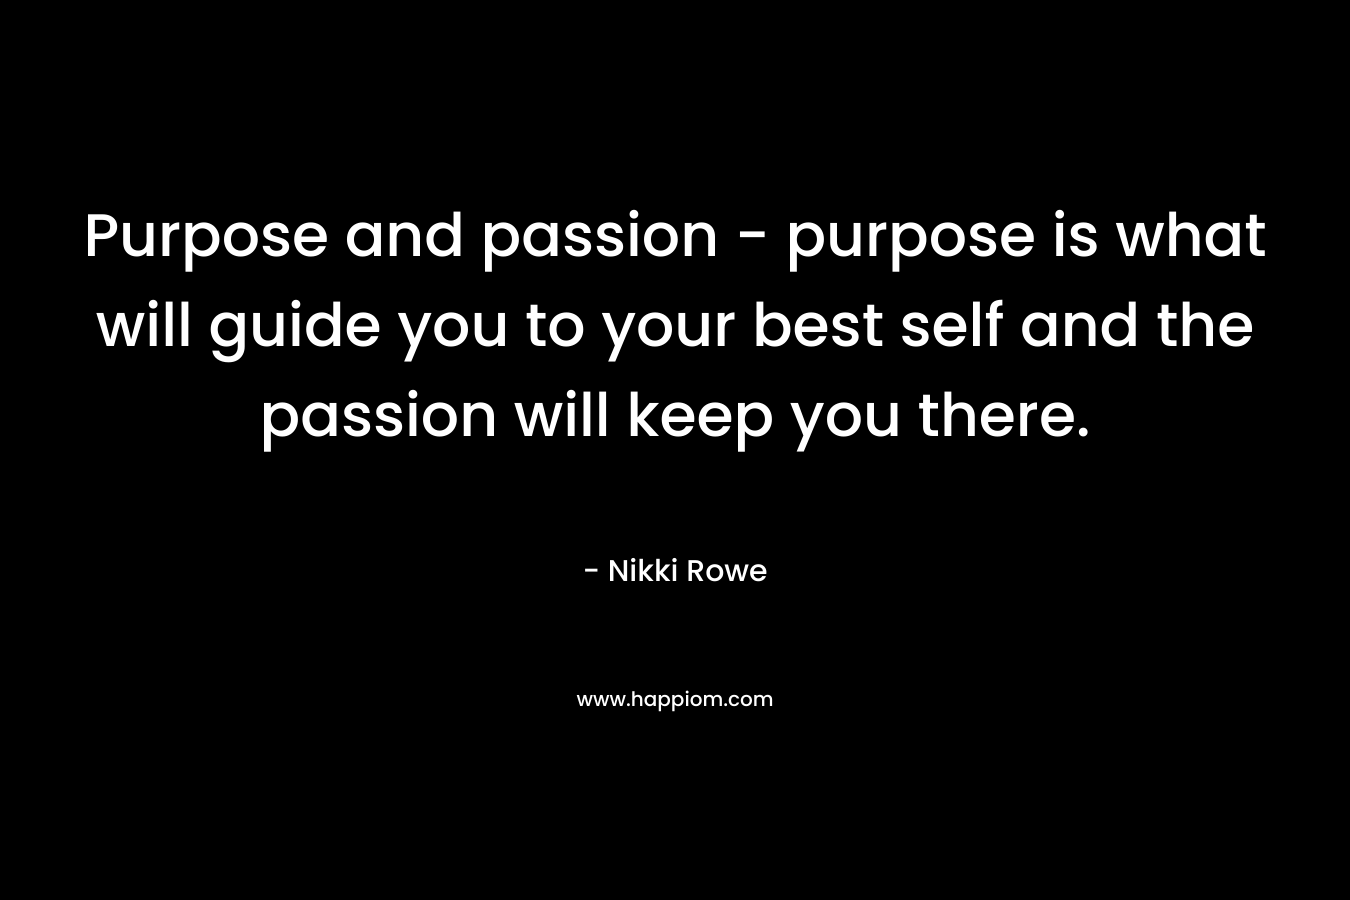 Purpose and passion - purpose is what will guide you to your best self and the passion will keep you there.